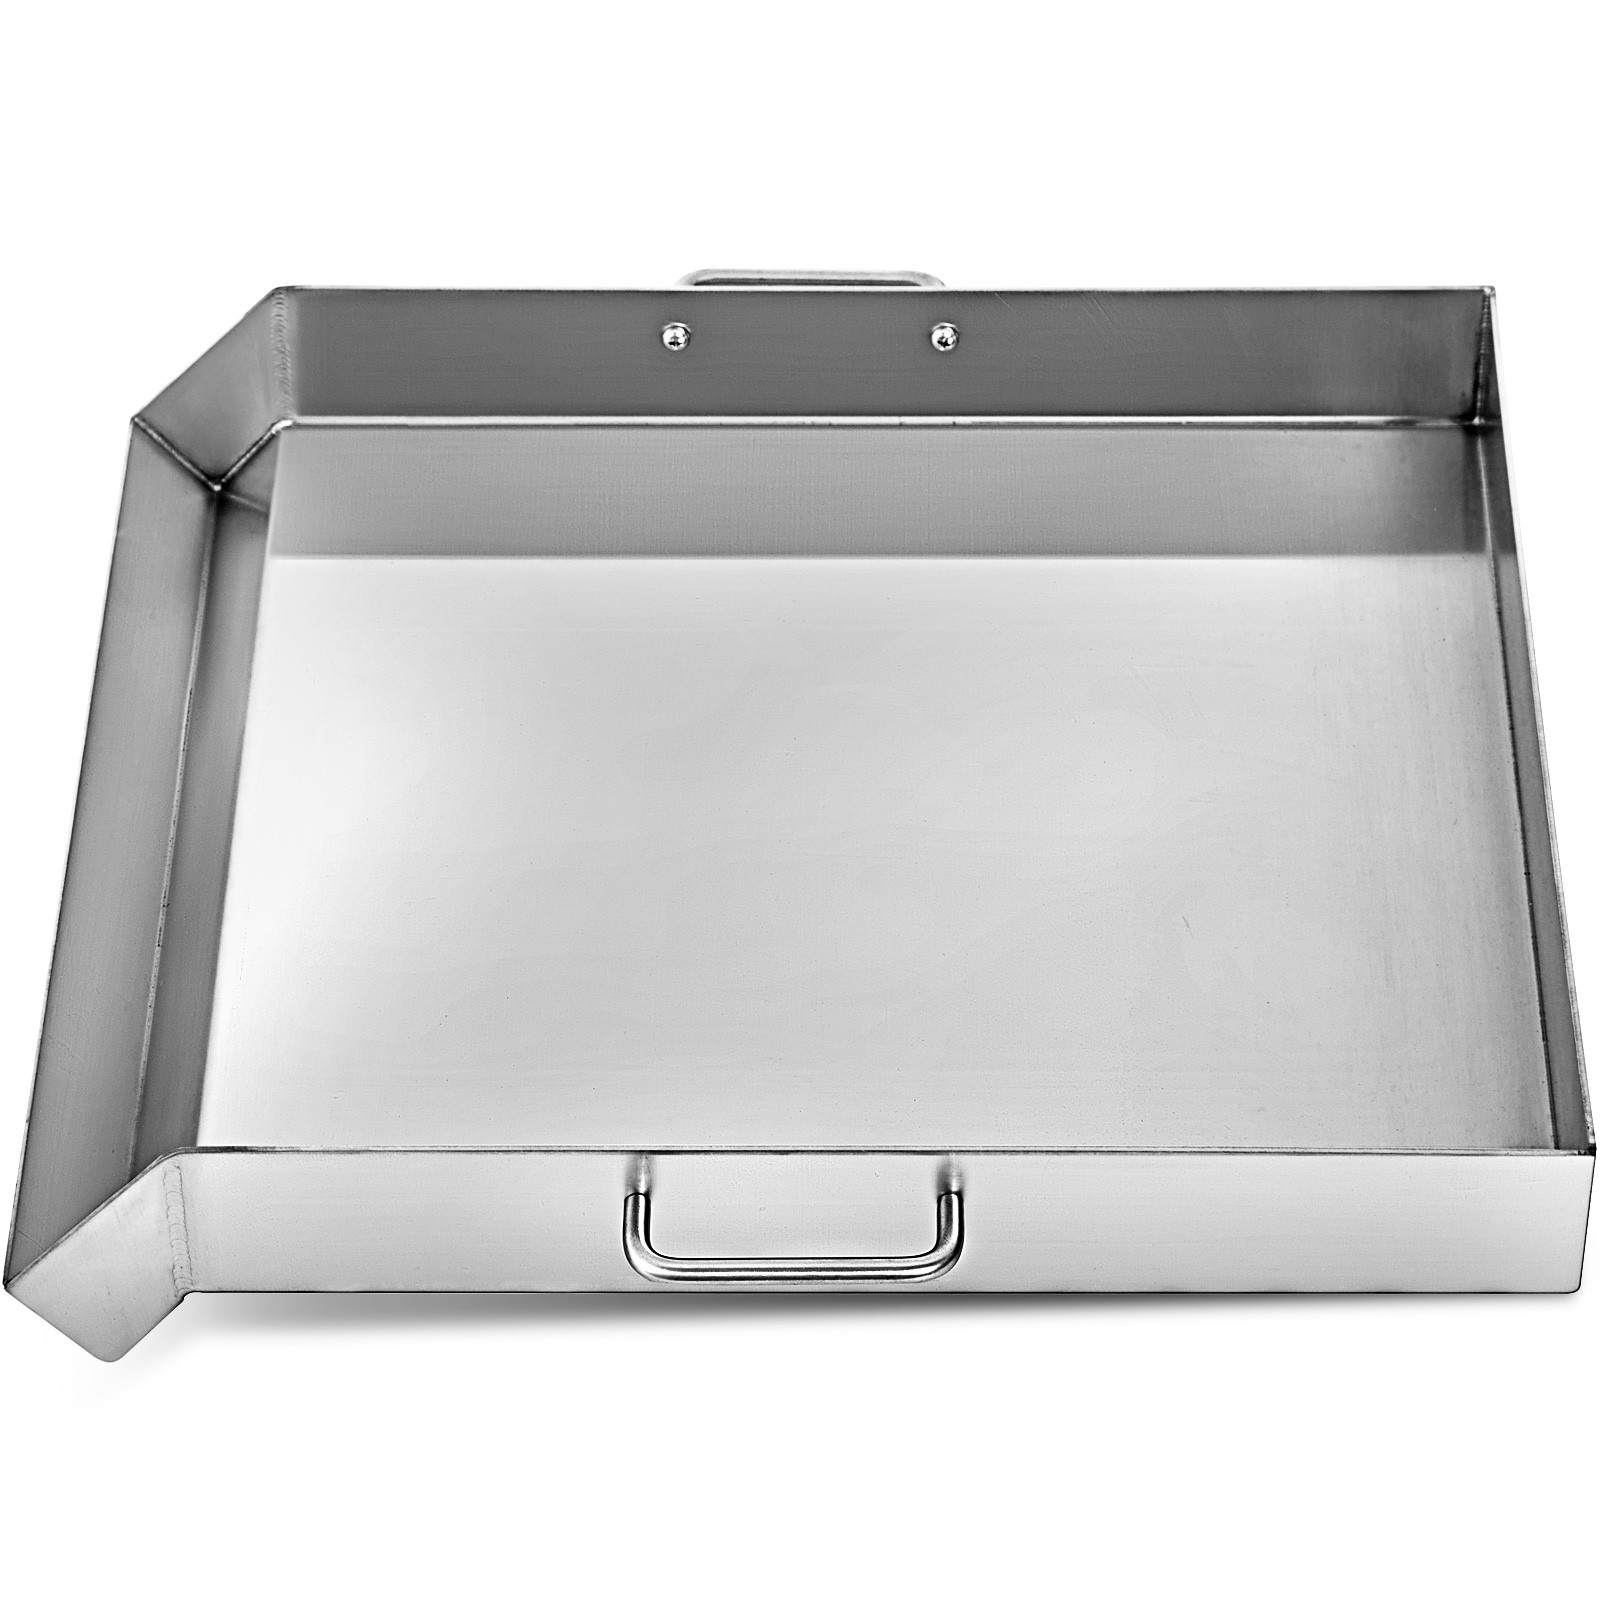 36" x 22" Stainless Steel Comal Griddle Flat Top Grill for Triple Burner Stove